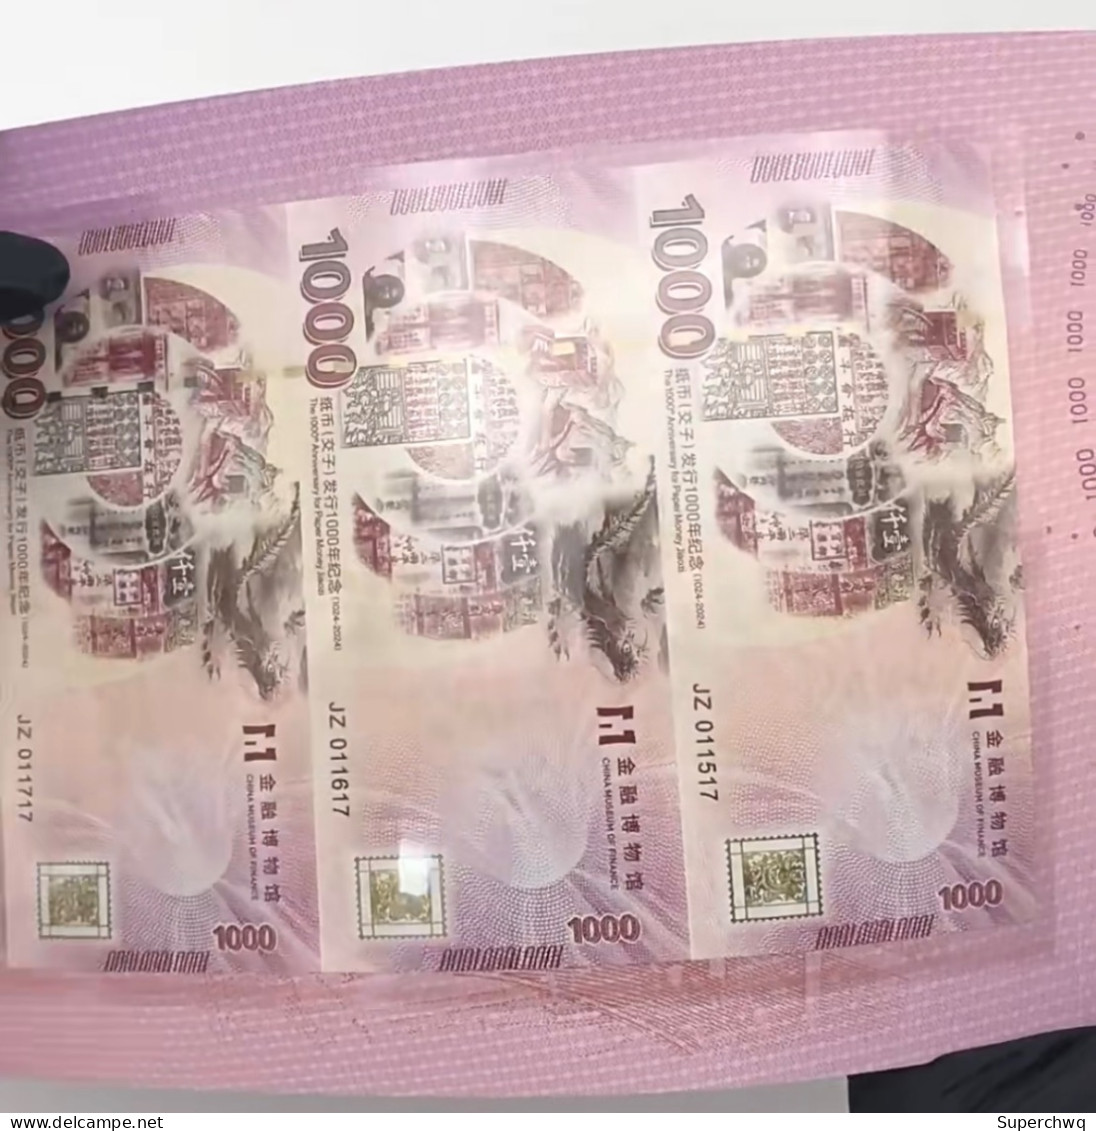 China Banknote Collection ，Paper money (Jiaozi) issued 1000 fluorescent the Year of the Loong commemorative coupons in t